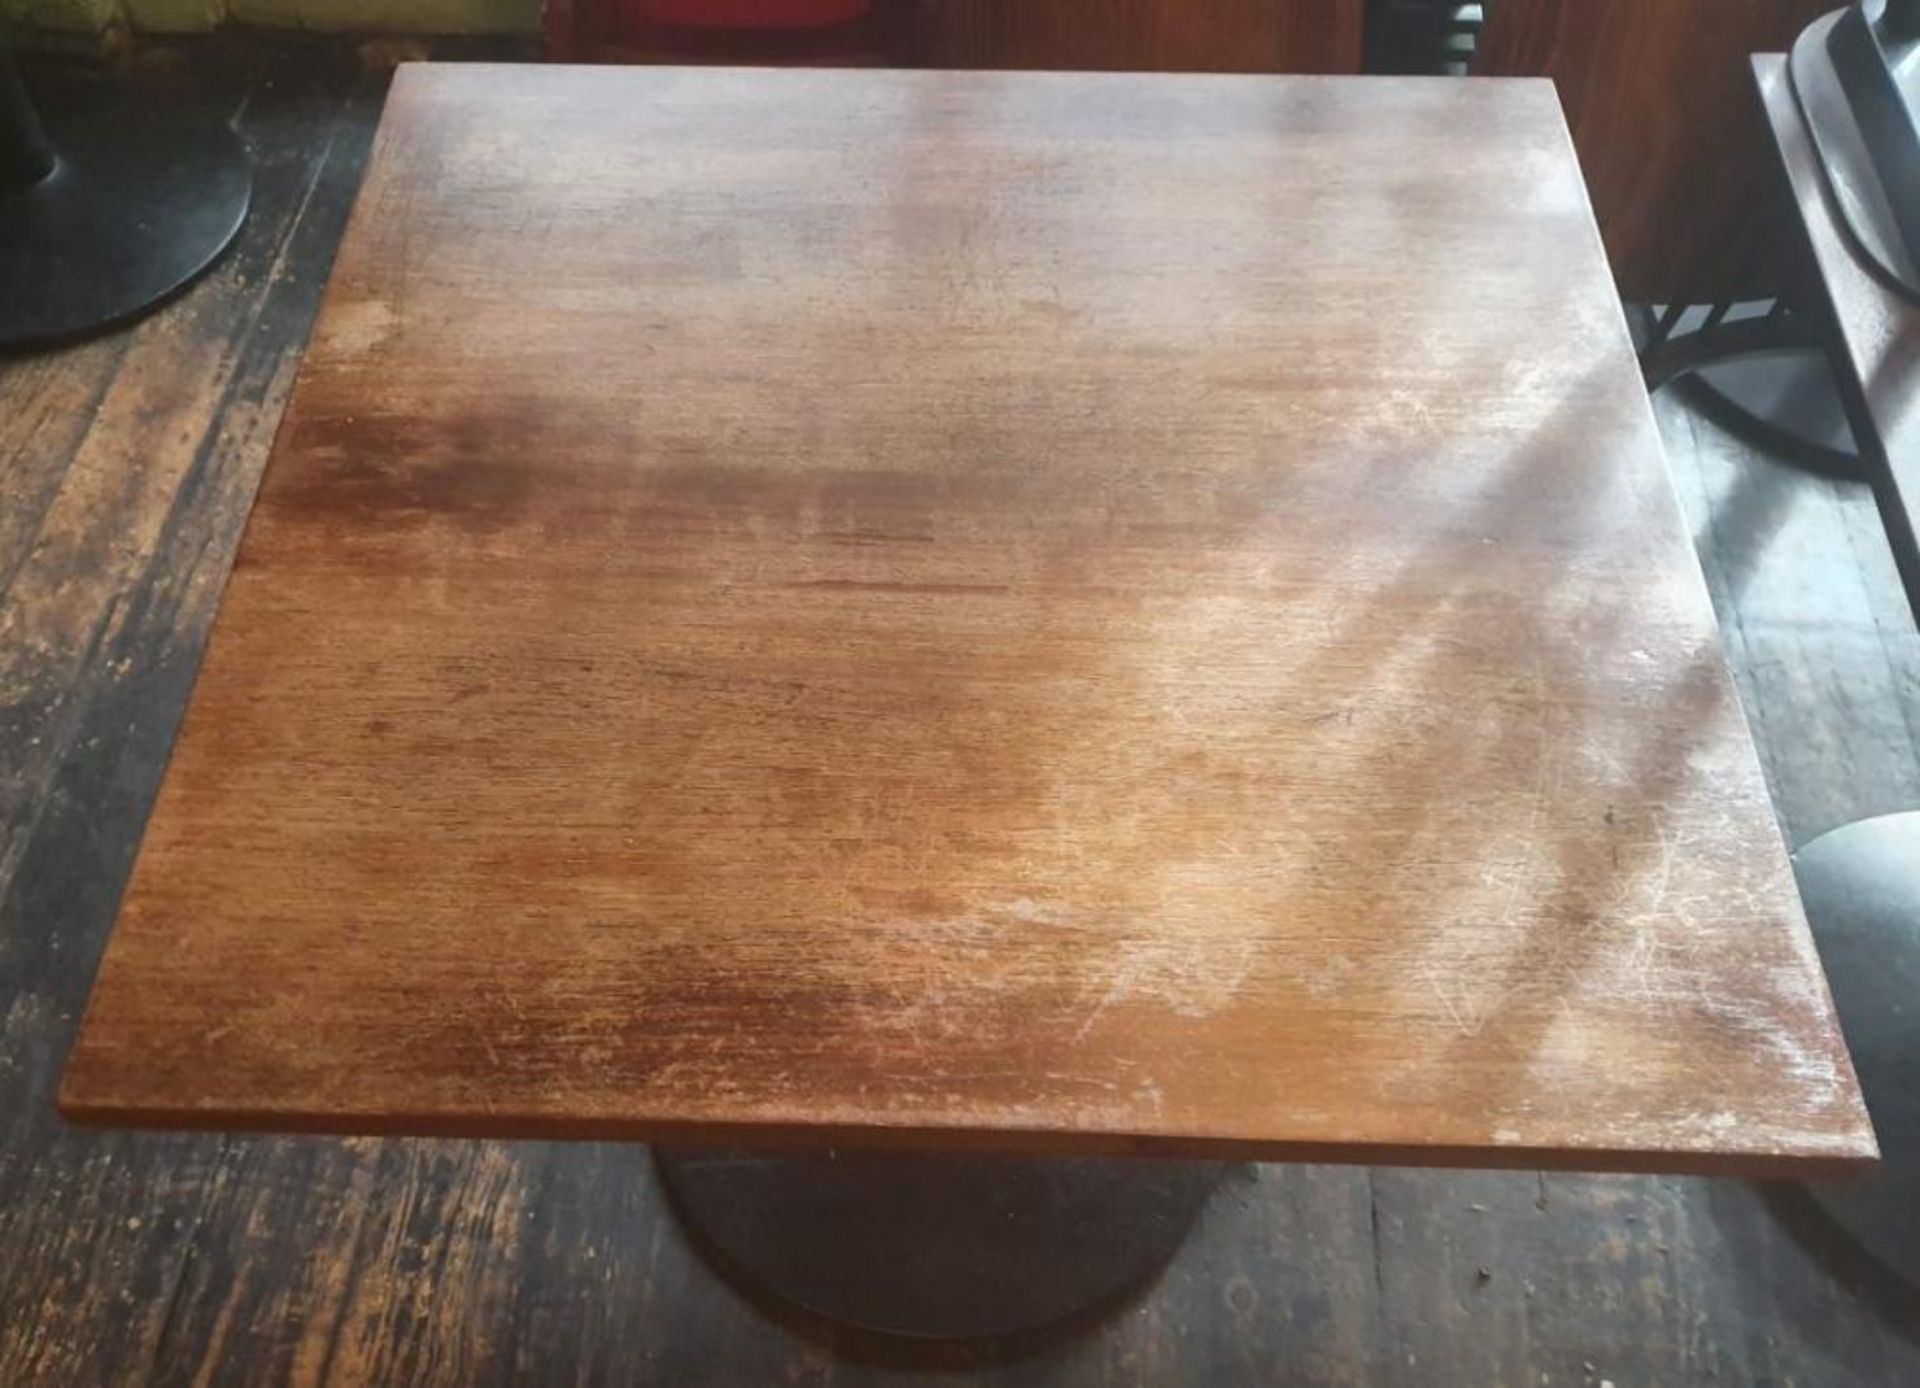 1 x Large Square Wooden Topped Bistro Table - Dimensions: 85 x 85 x H74cm - Recently Taken From A Co - Image 2 of 3